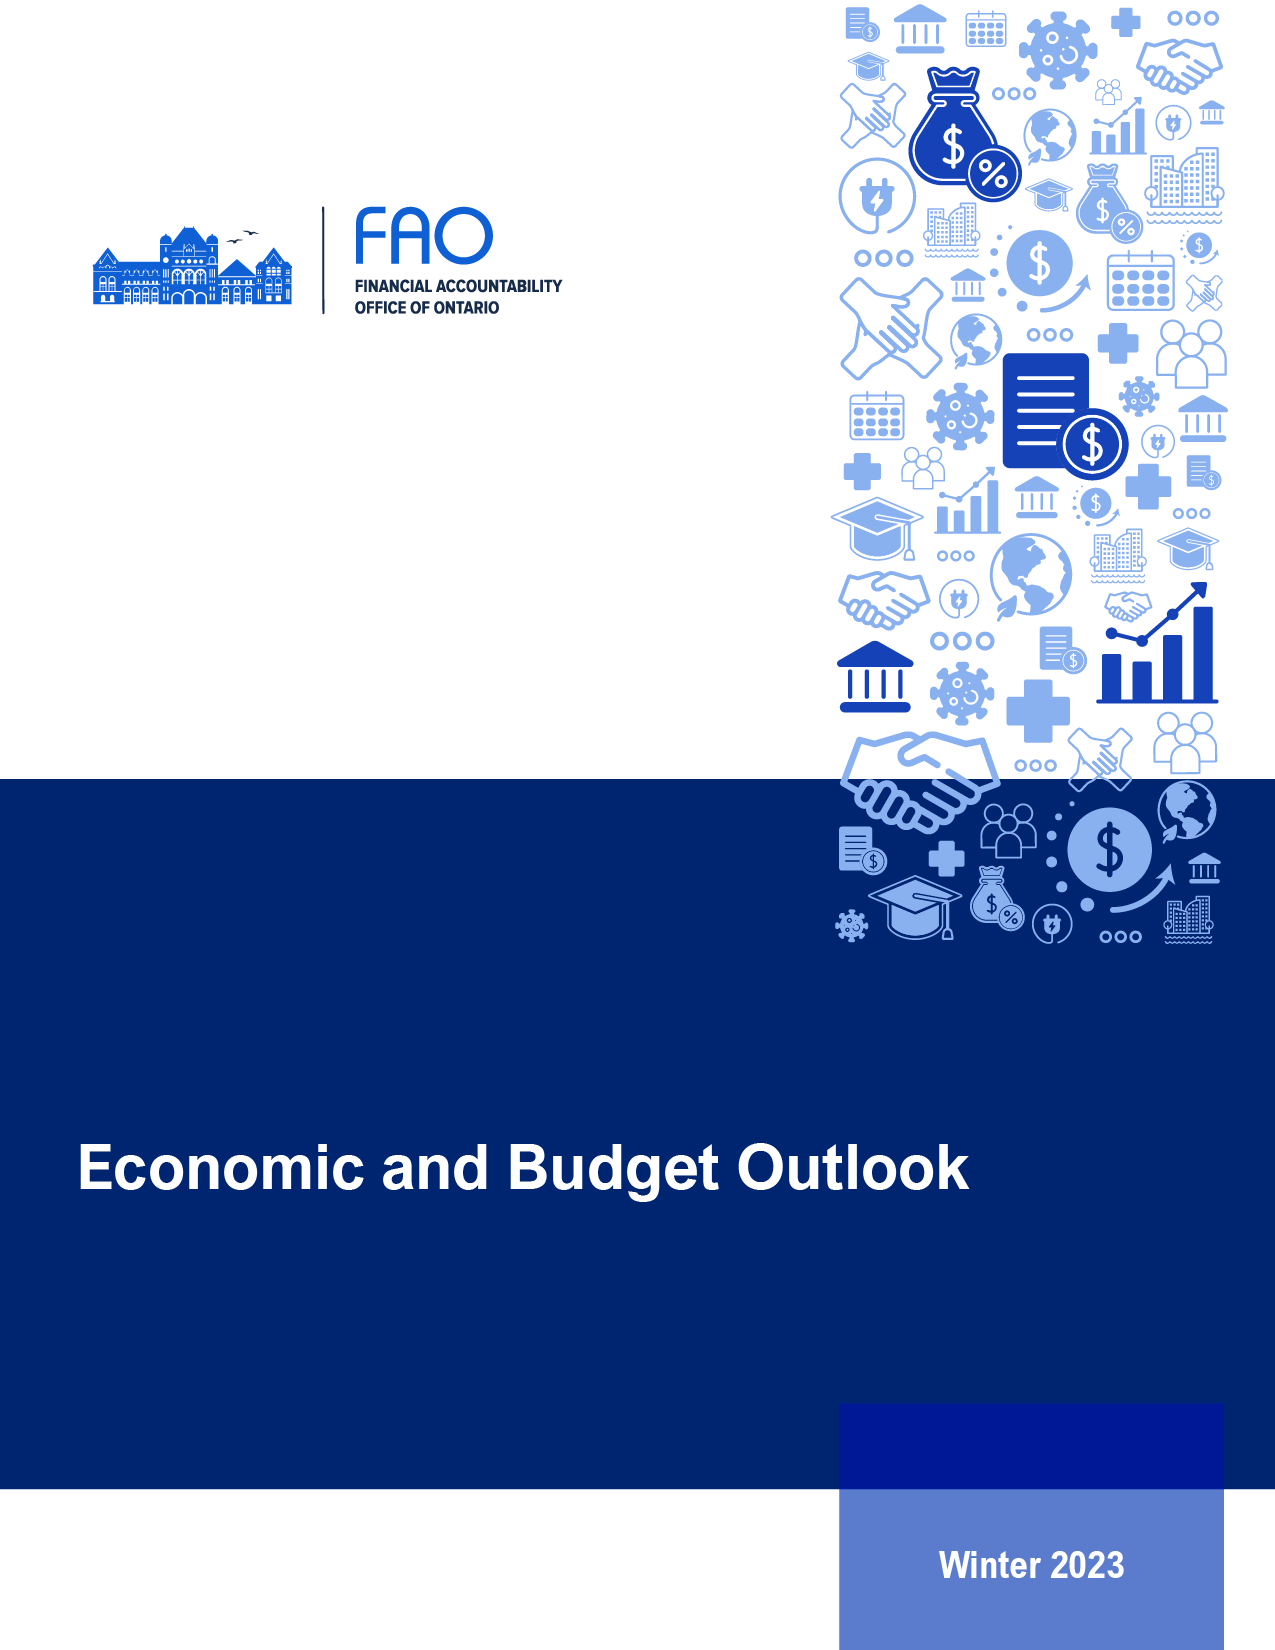 conomic and Budget Outlook, Winter 2023 report cover